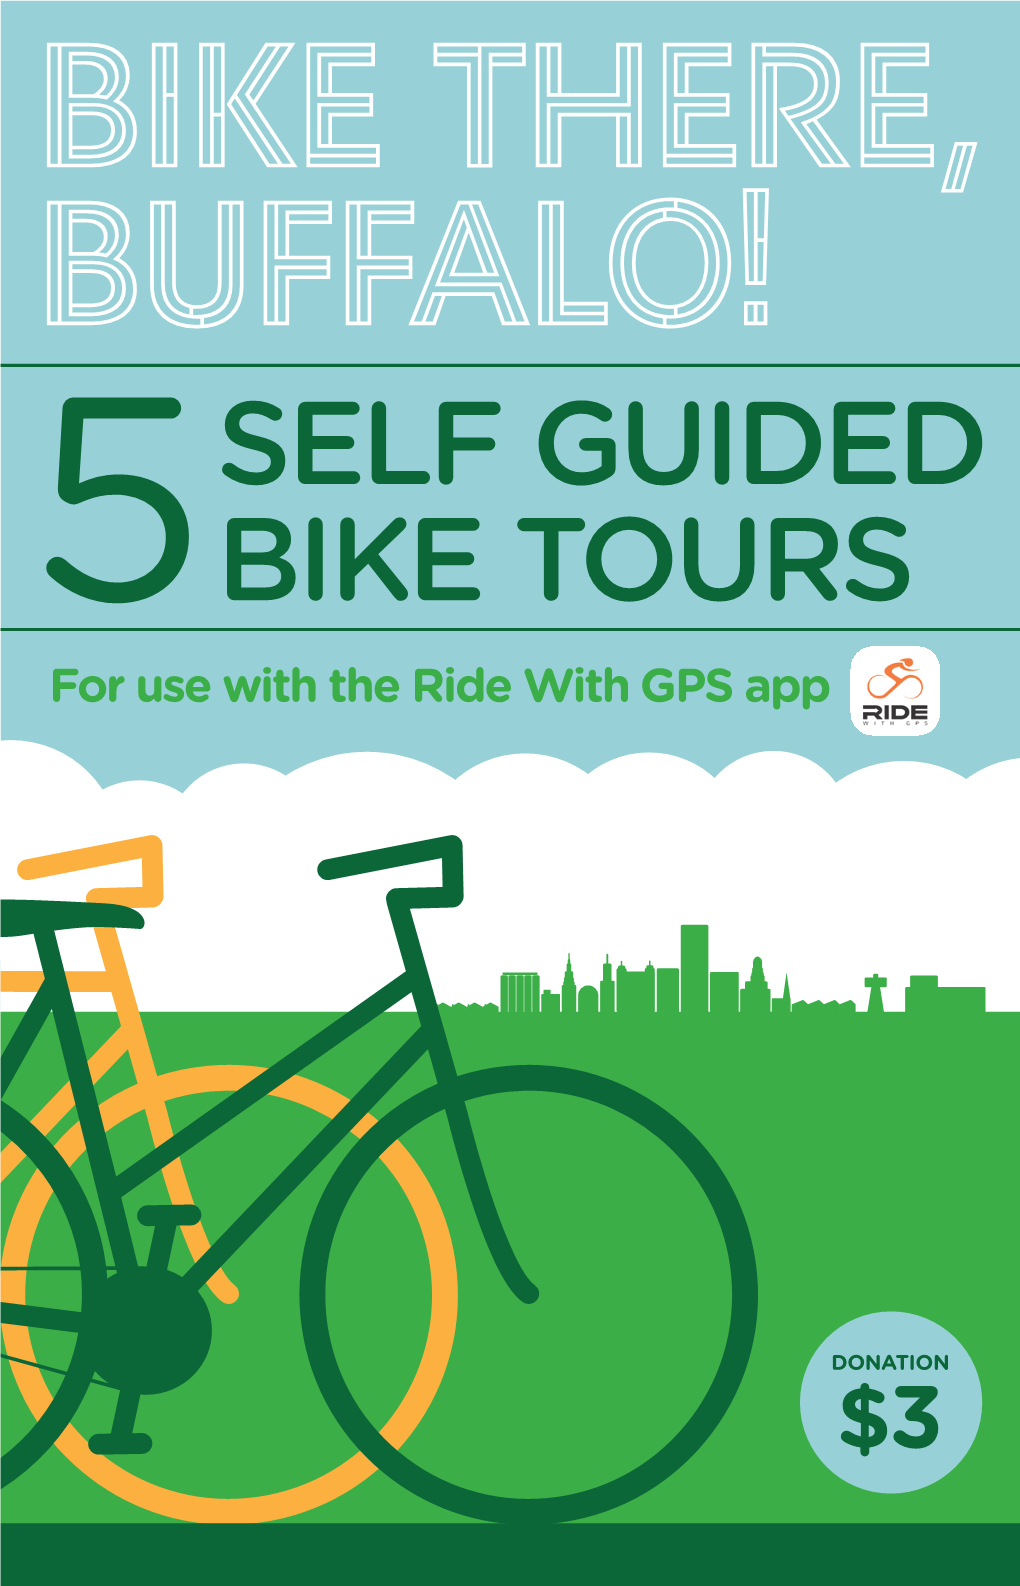 BIKE THERE, BUFFALO! SELF GUIDED 5BIKE TOURS for Use with the Ride with GPS App